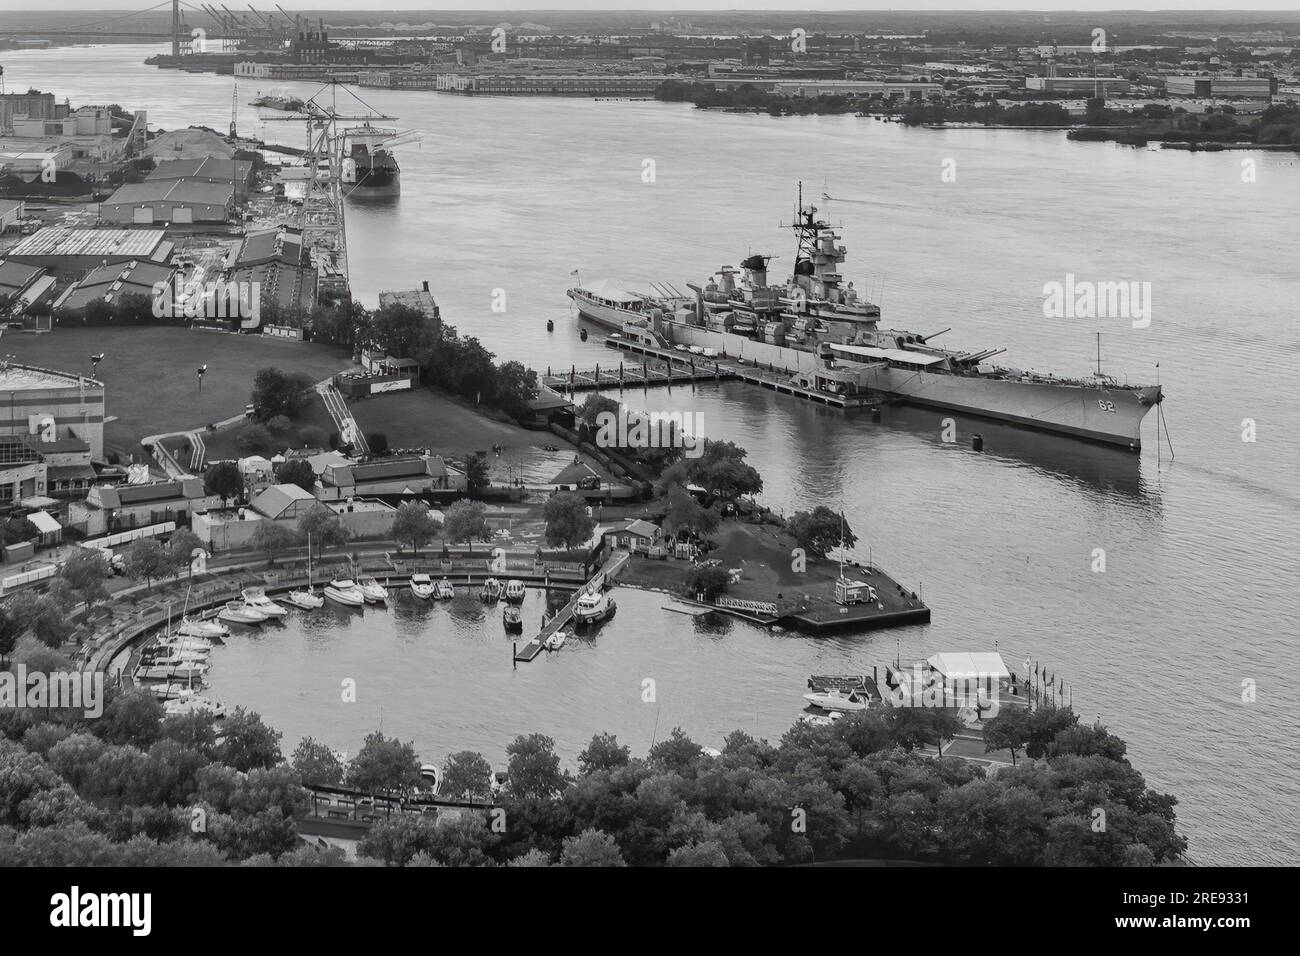 USS New Jersey (BB-62) is an Iowa-class battleship, and was the second ship of the United States Navy to be named after the US state of New Jersey. Sh Stock Photo